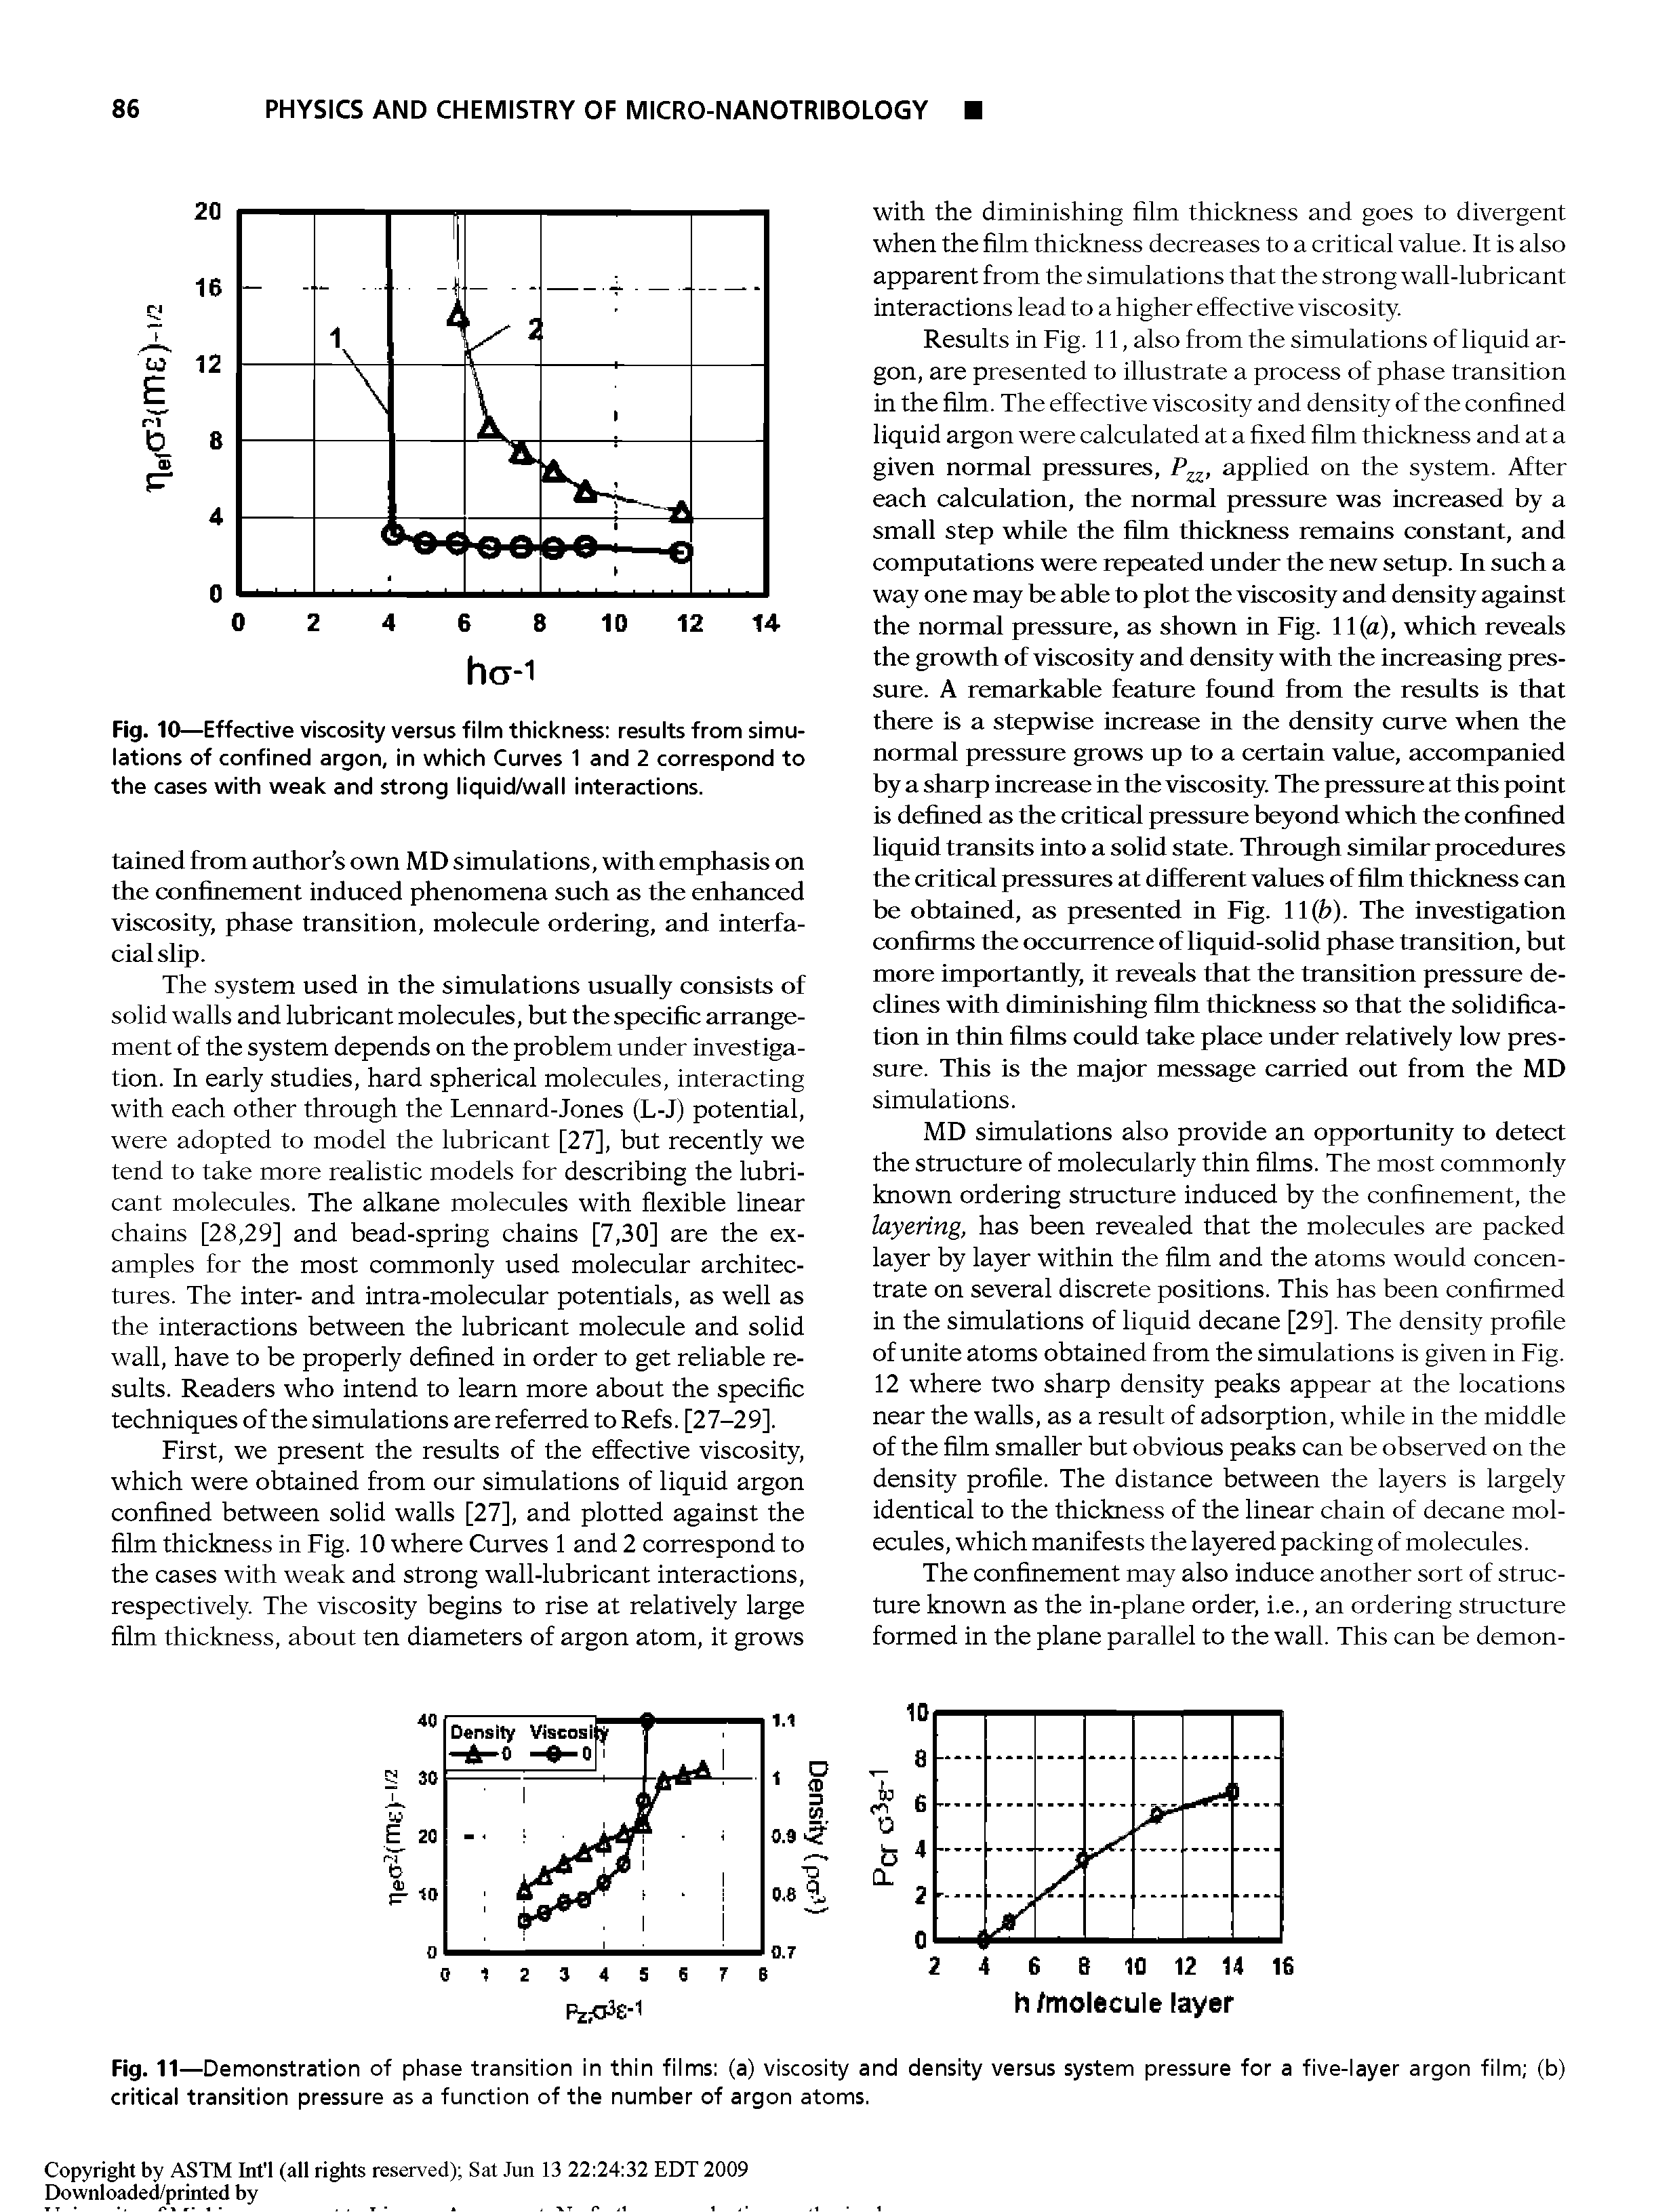 Fig. 11—Demonstration of phase transition in thin fiims (a) viscosity and density versus system pressure for a five-iayer argon fiim (b) critical transition pressure as a function of the number of argon atoms.